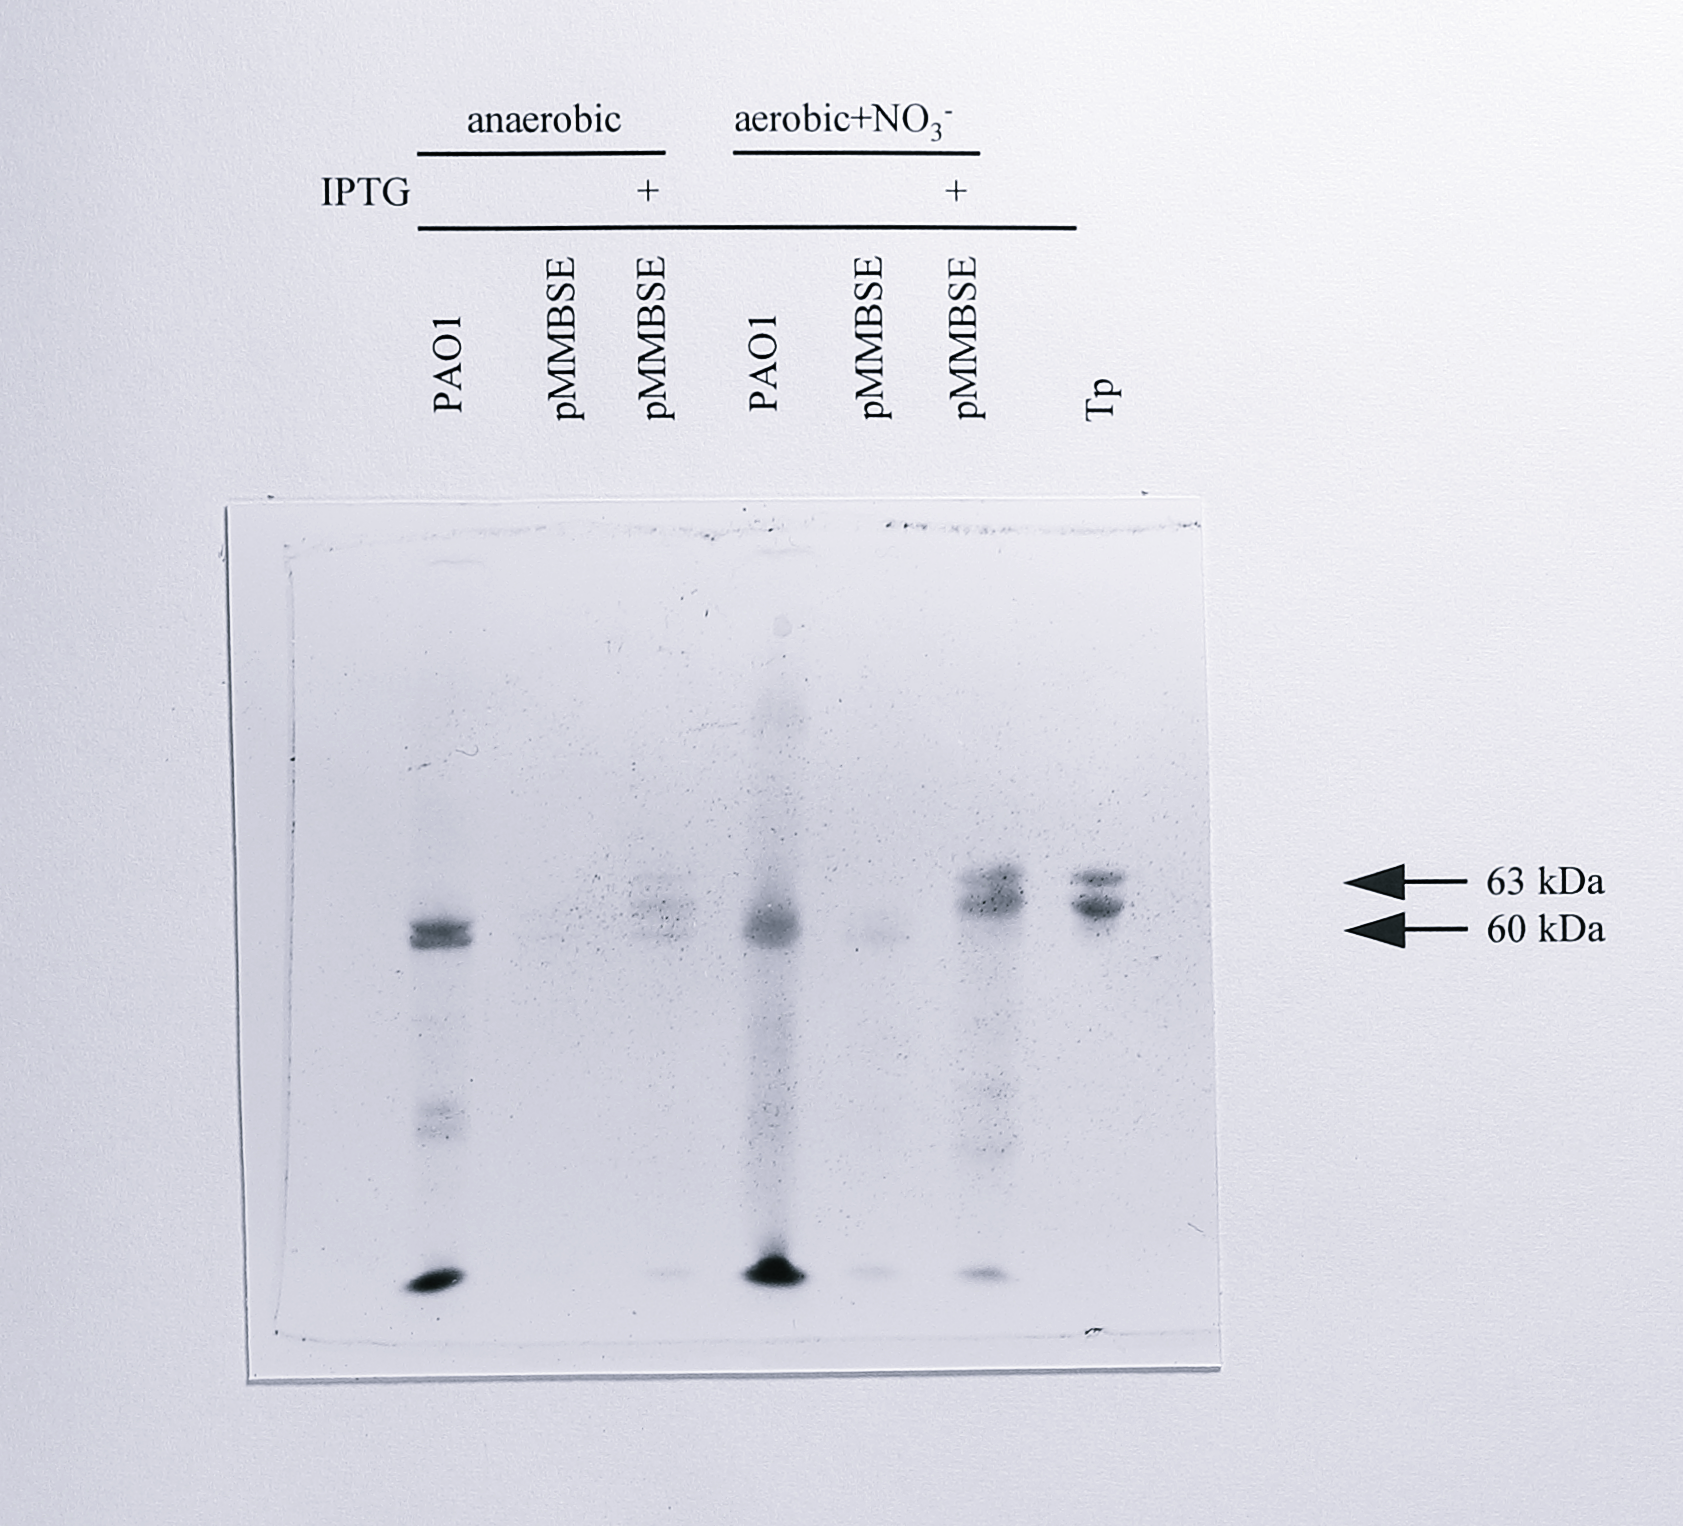 Comparison of the _c_-type cytochrome content of _Ps. aeruginosa_ with that of _Ps. aeruginosa_ [pMMBSE] under different growth conditions. 100 $\mu$g of protein from the cultures indicated was loaded in each lane and separated by SDS-PAGE in a 6% acrylamide gel. The gel was stained for covalently-attached haem as described in Materials and Methods. Lane Tp contained 5 $\mu$g of purified cytochrome _cd_$_1$ from _T. pantotropha_.